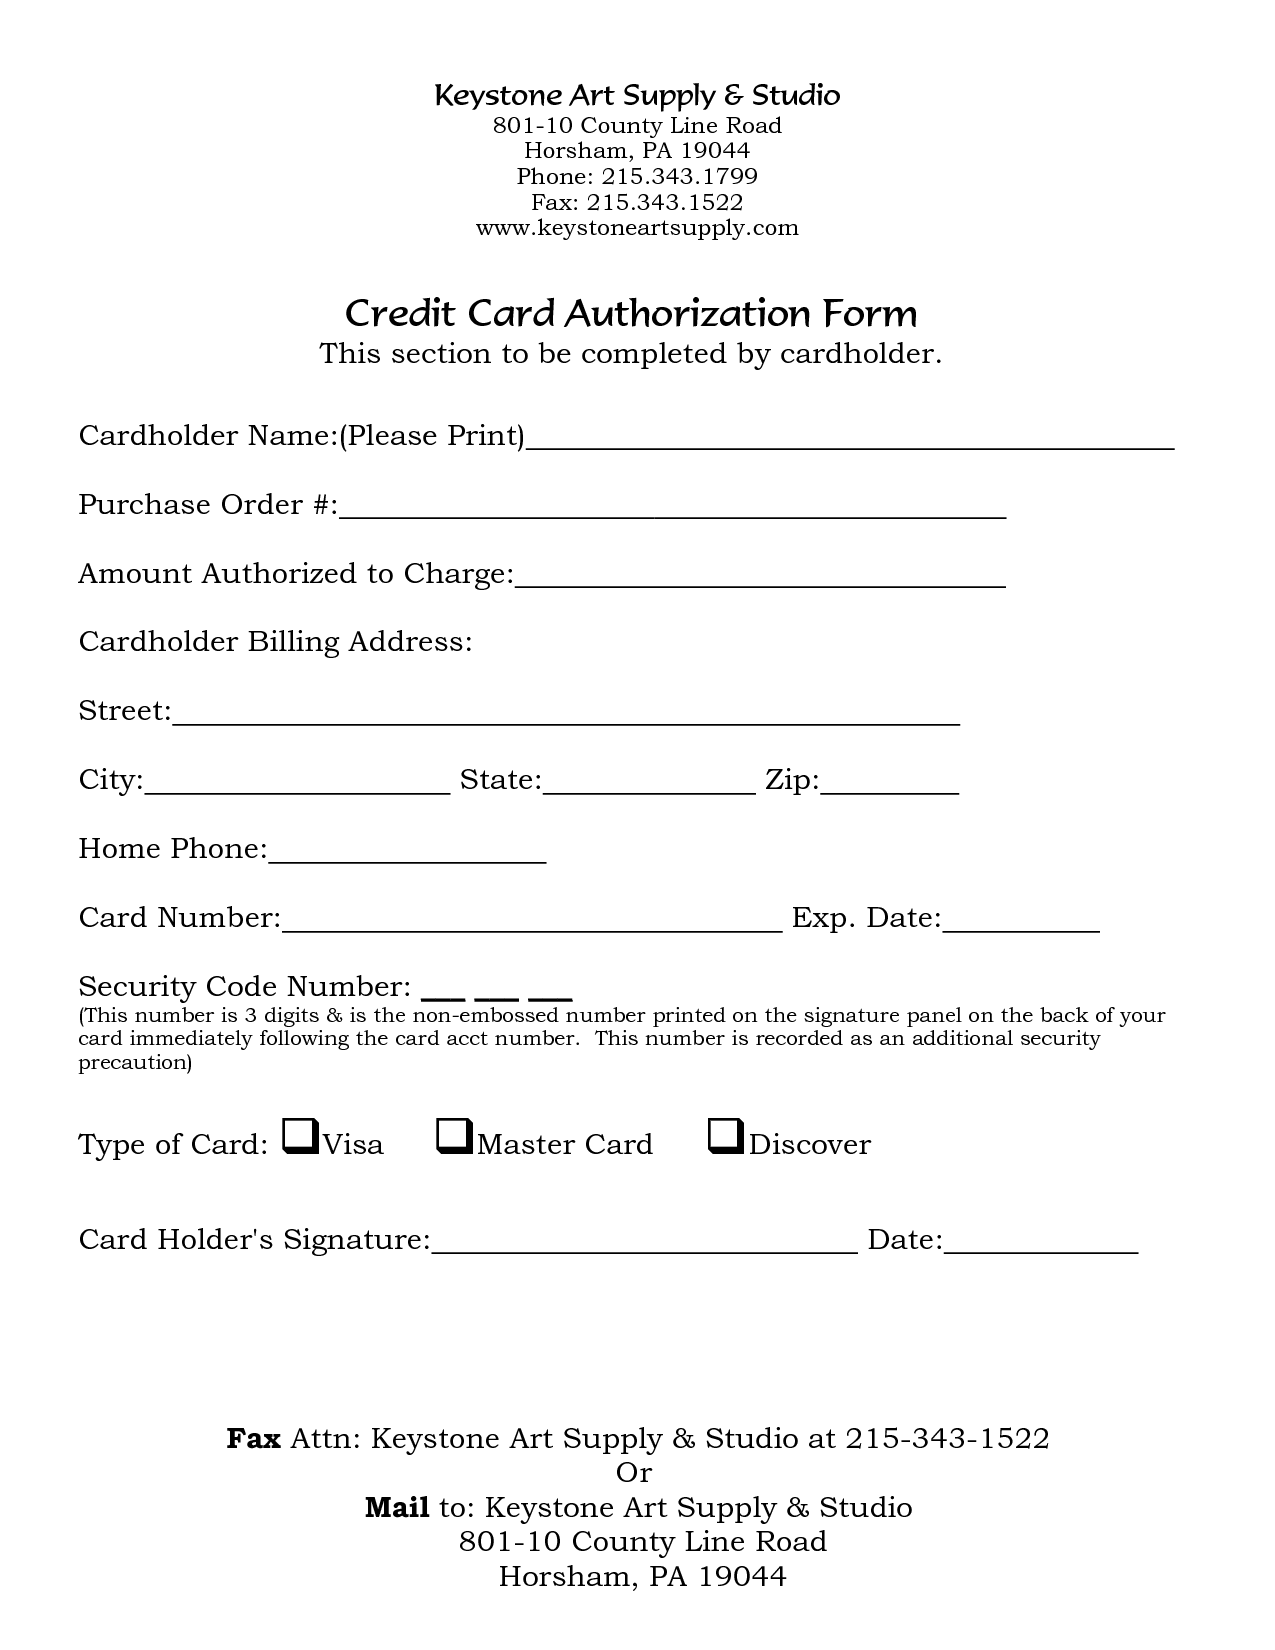 free credit card authorization form template   Boat.jeremyeaton.co